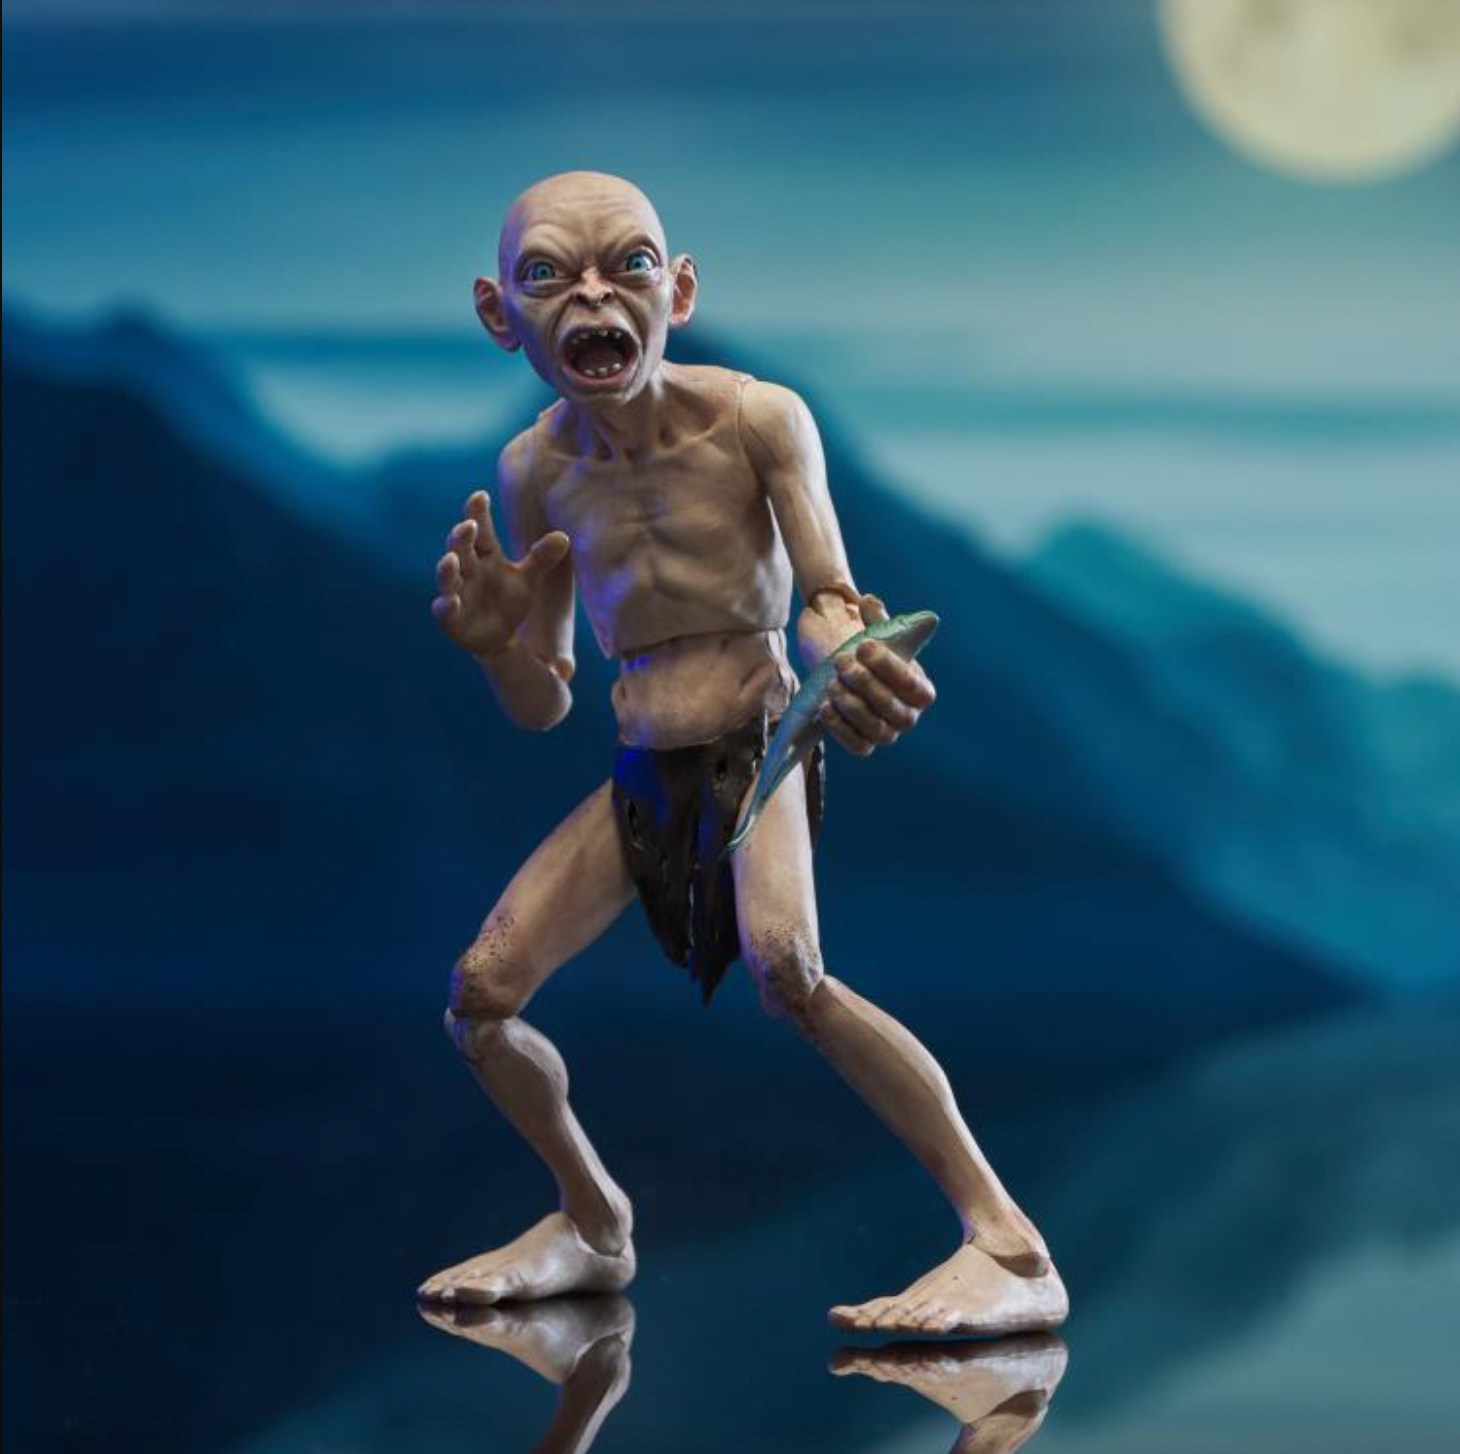 Lord of the Rings: Gollum Hit With Big Delay, Adds Co-Publisher